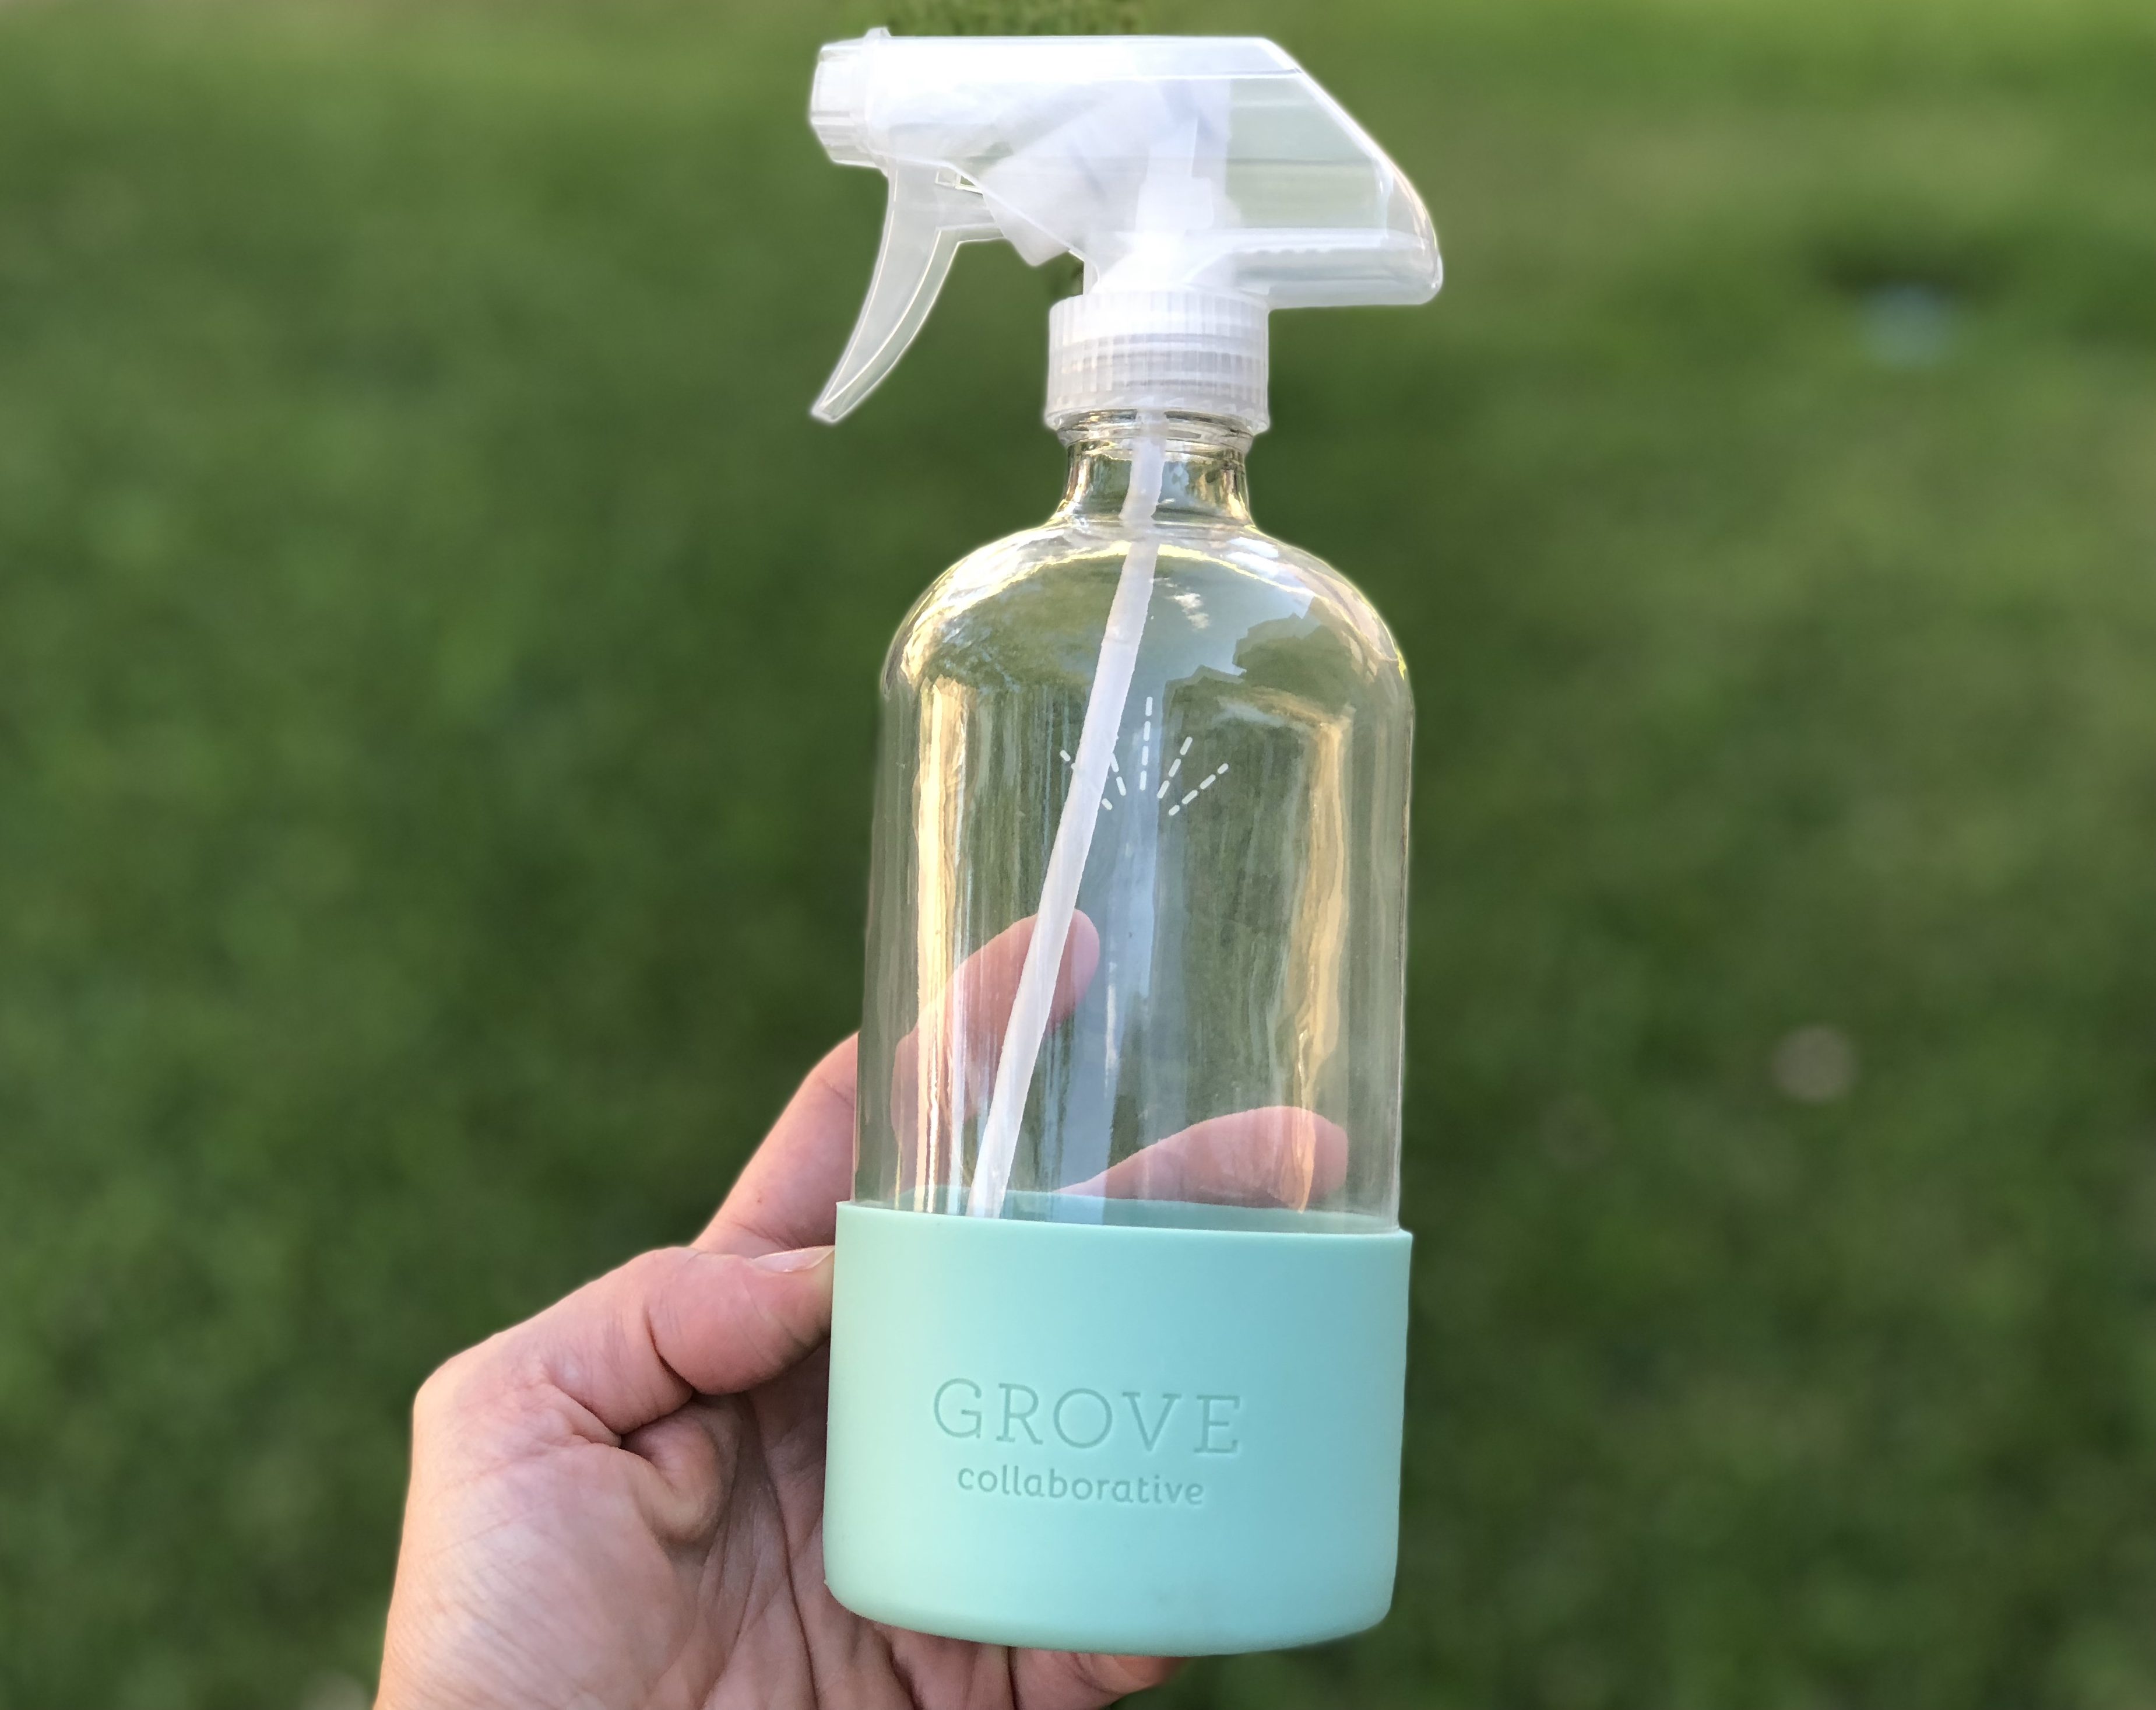 Get a free mrs meyers gift set from Grove Collaborative. A Grove Collaborative spray Bottle